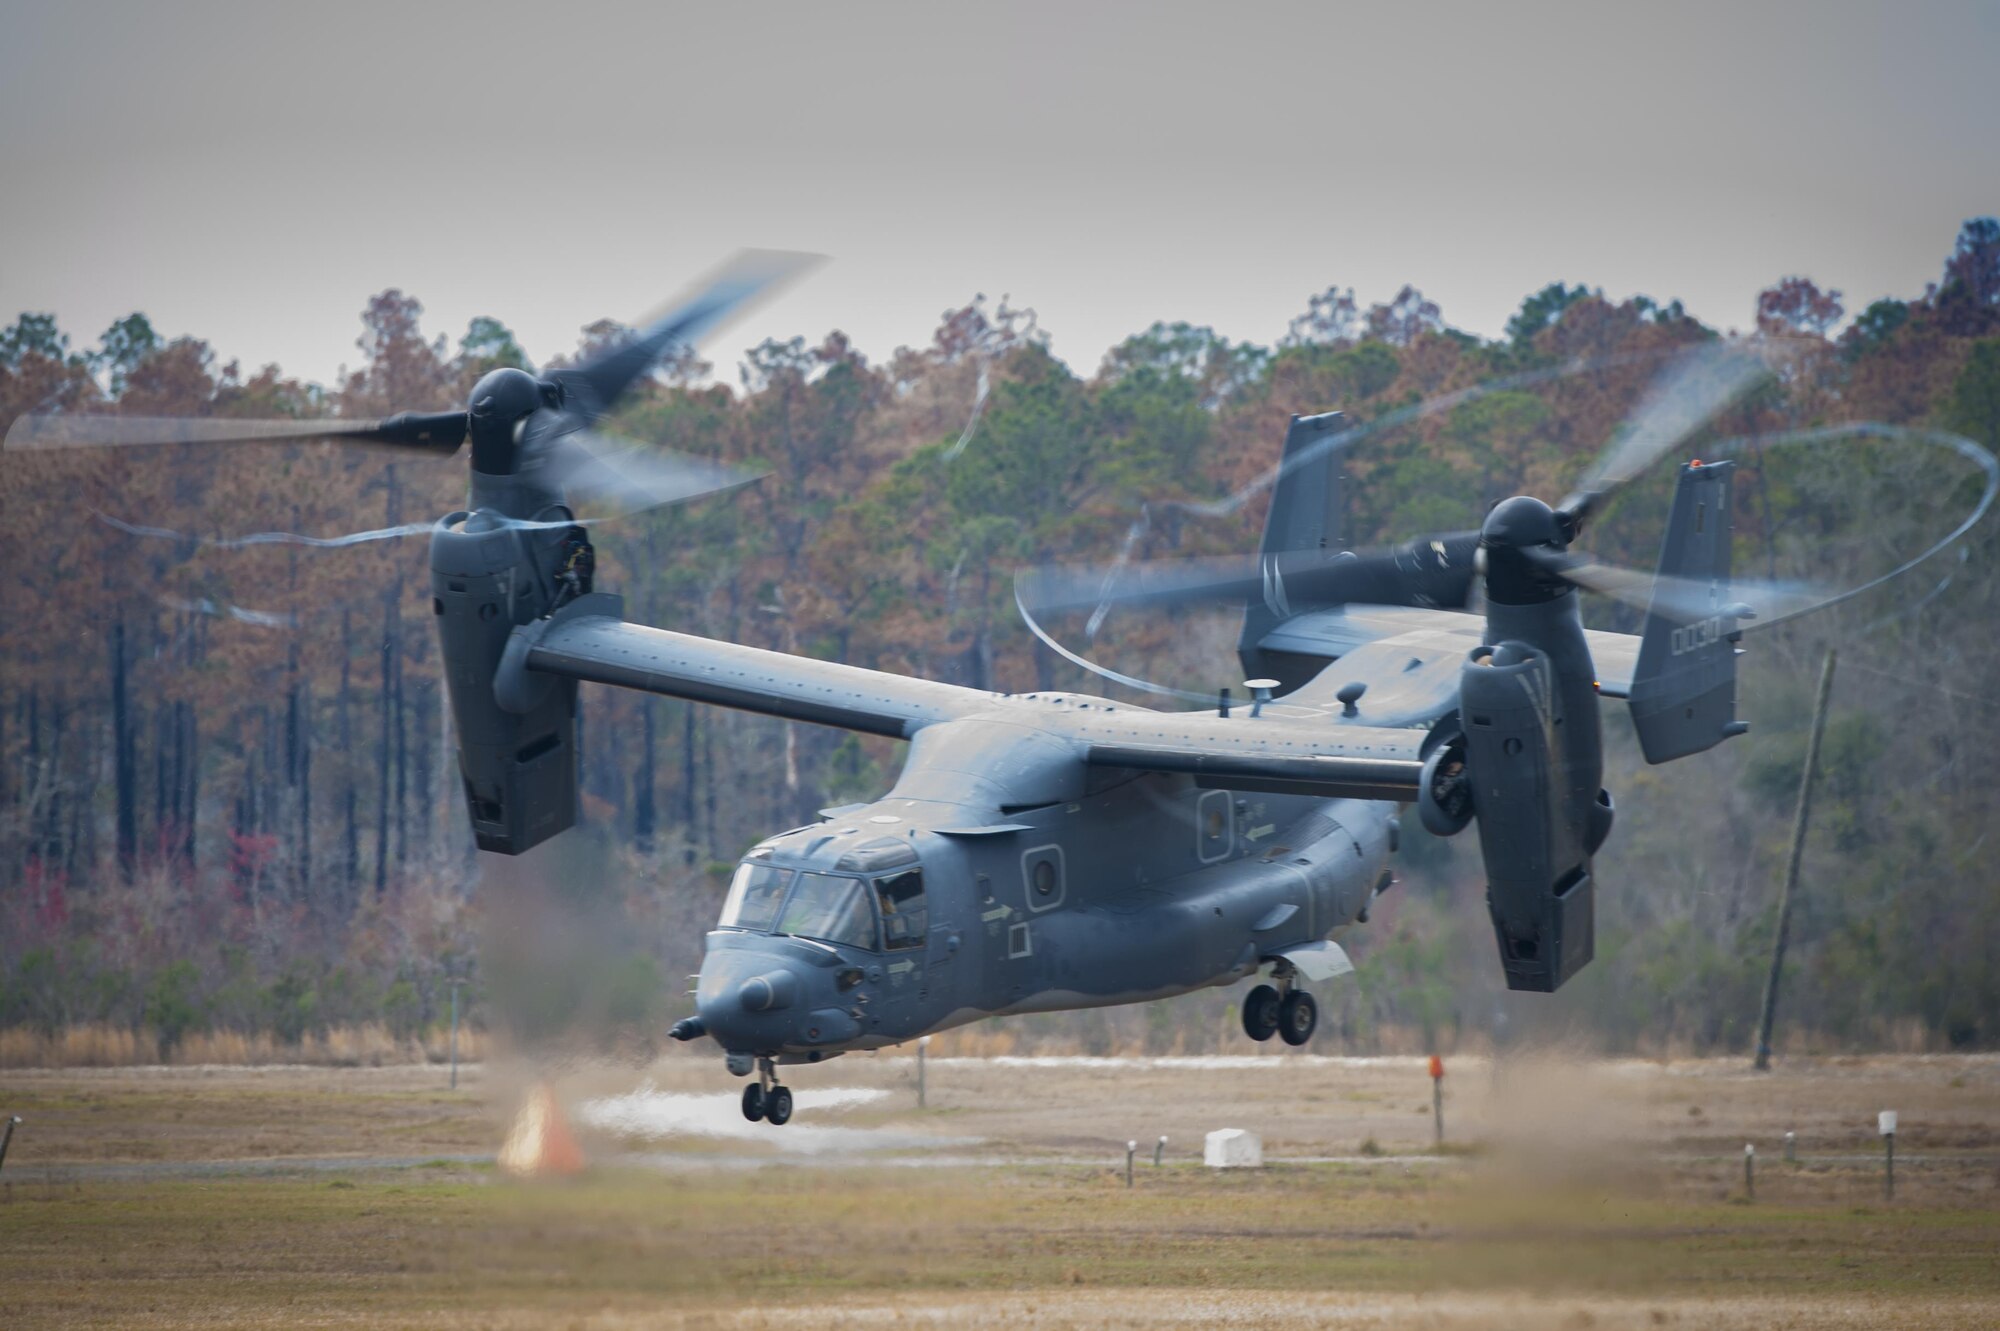 A CV-22 Osprey takes off during a training exercise, March 4, 2016, at Moody Air Force Base, Ga. During the training, the aircraft conducted tactical air and ground maneuvers, as well as weapons training. (U.S. Air Force photo by Airman 1st Class Lauren M. Johnson/Released)